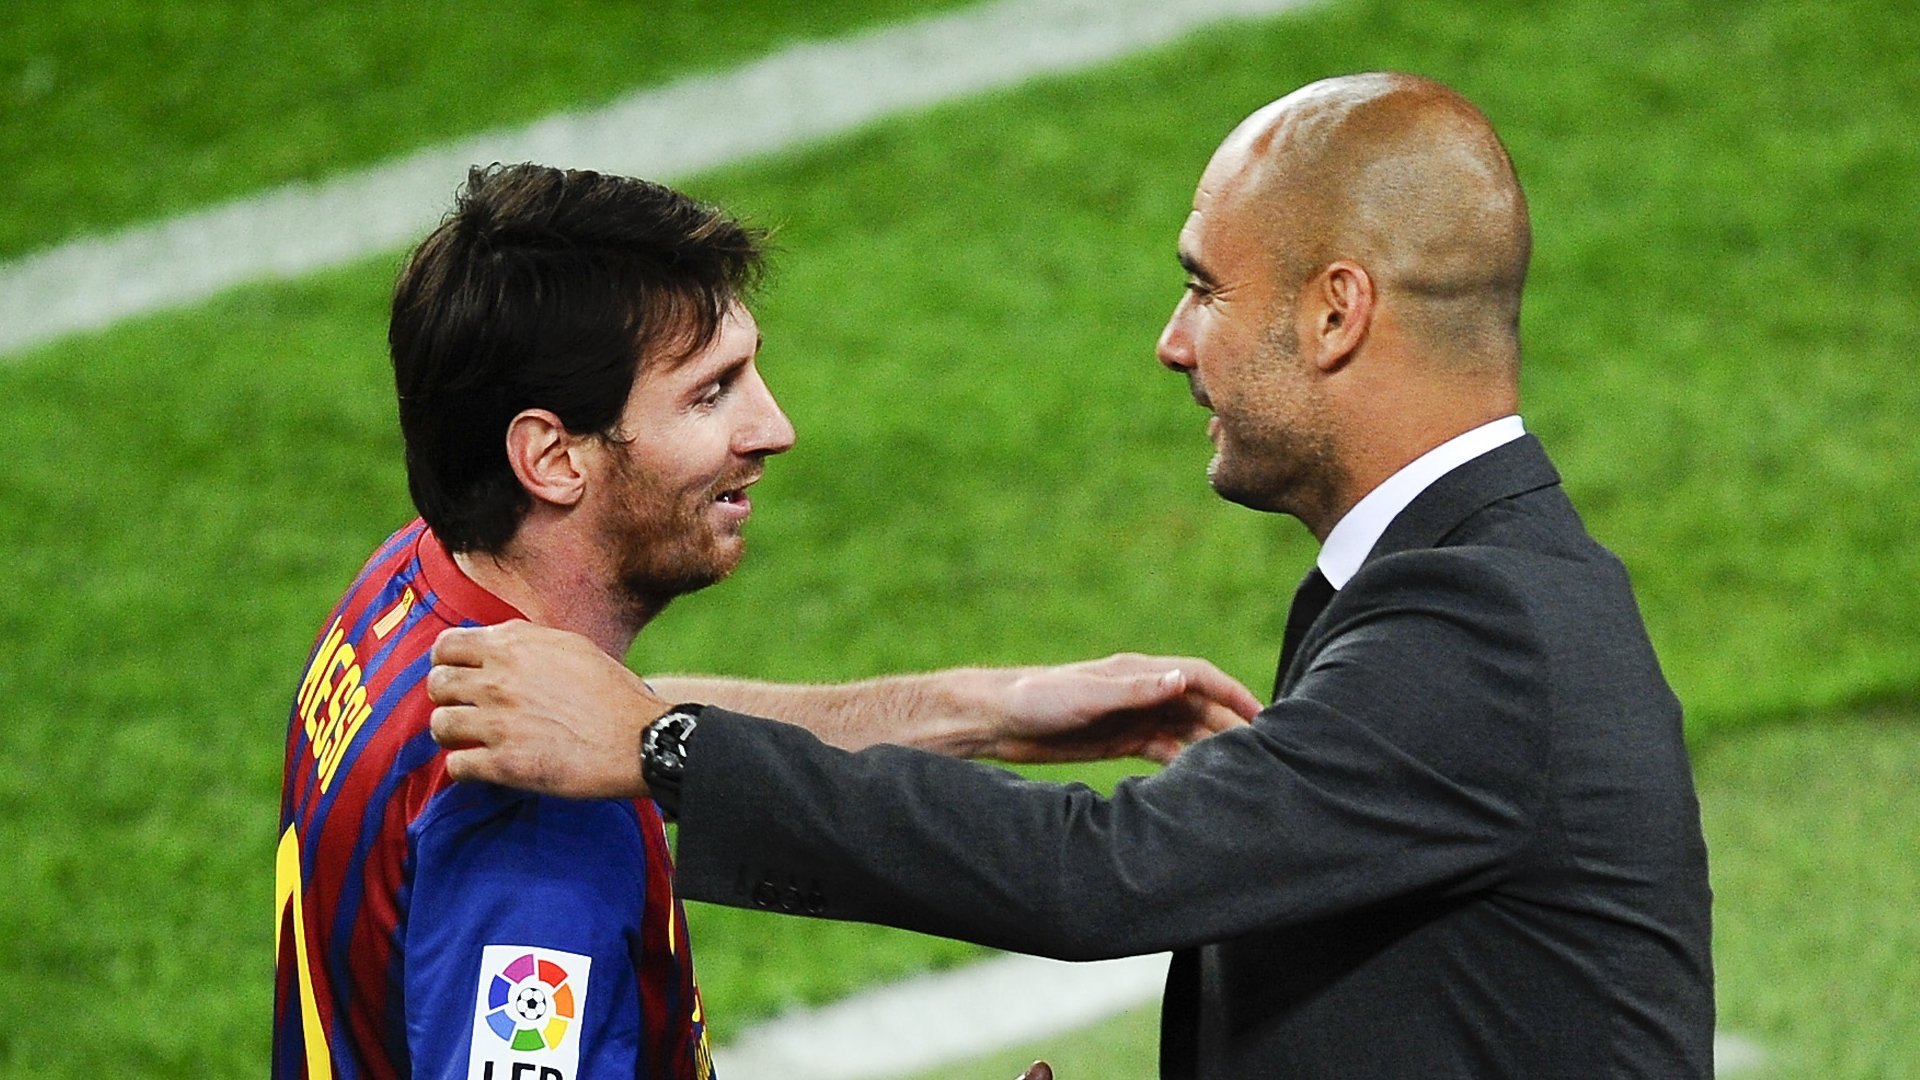 When I saw Messi, I knew Barcelona would win everything – Guardiola